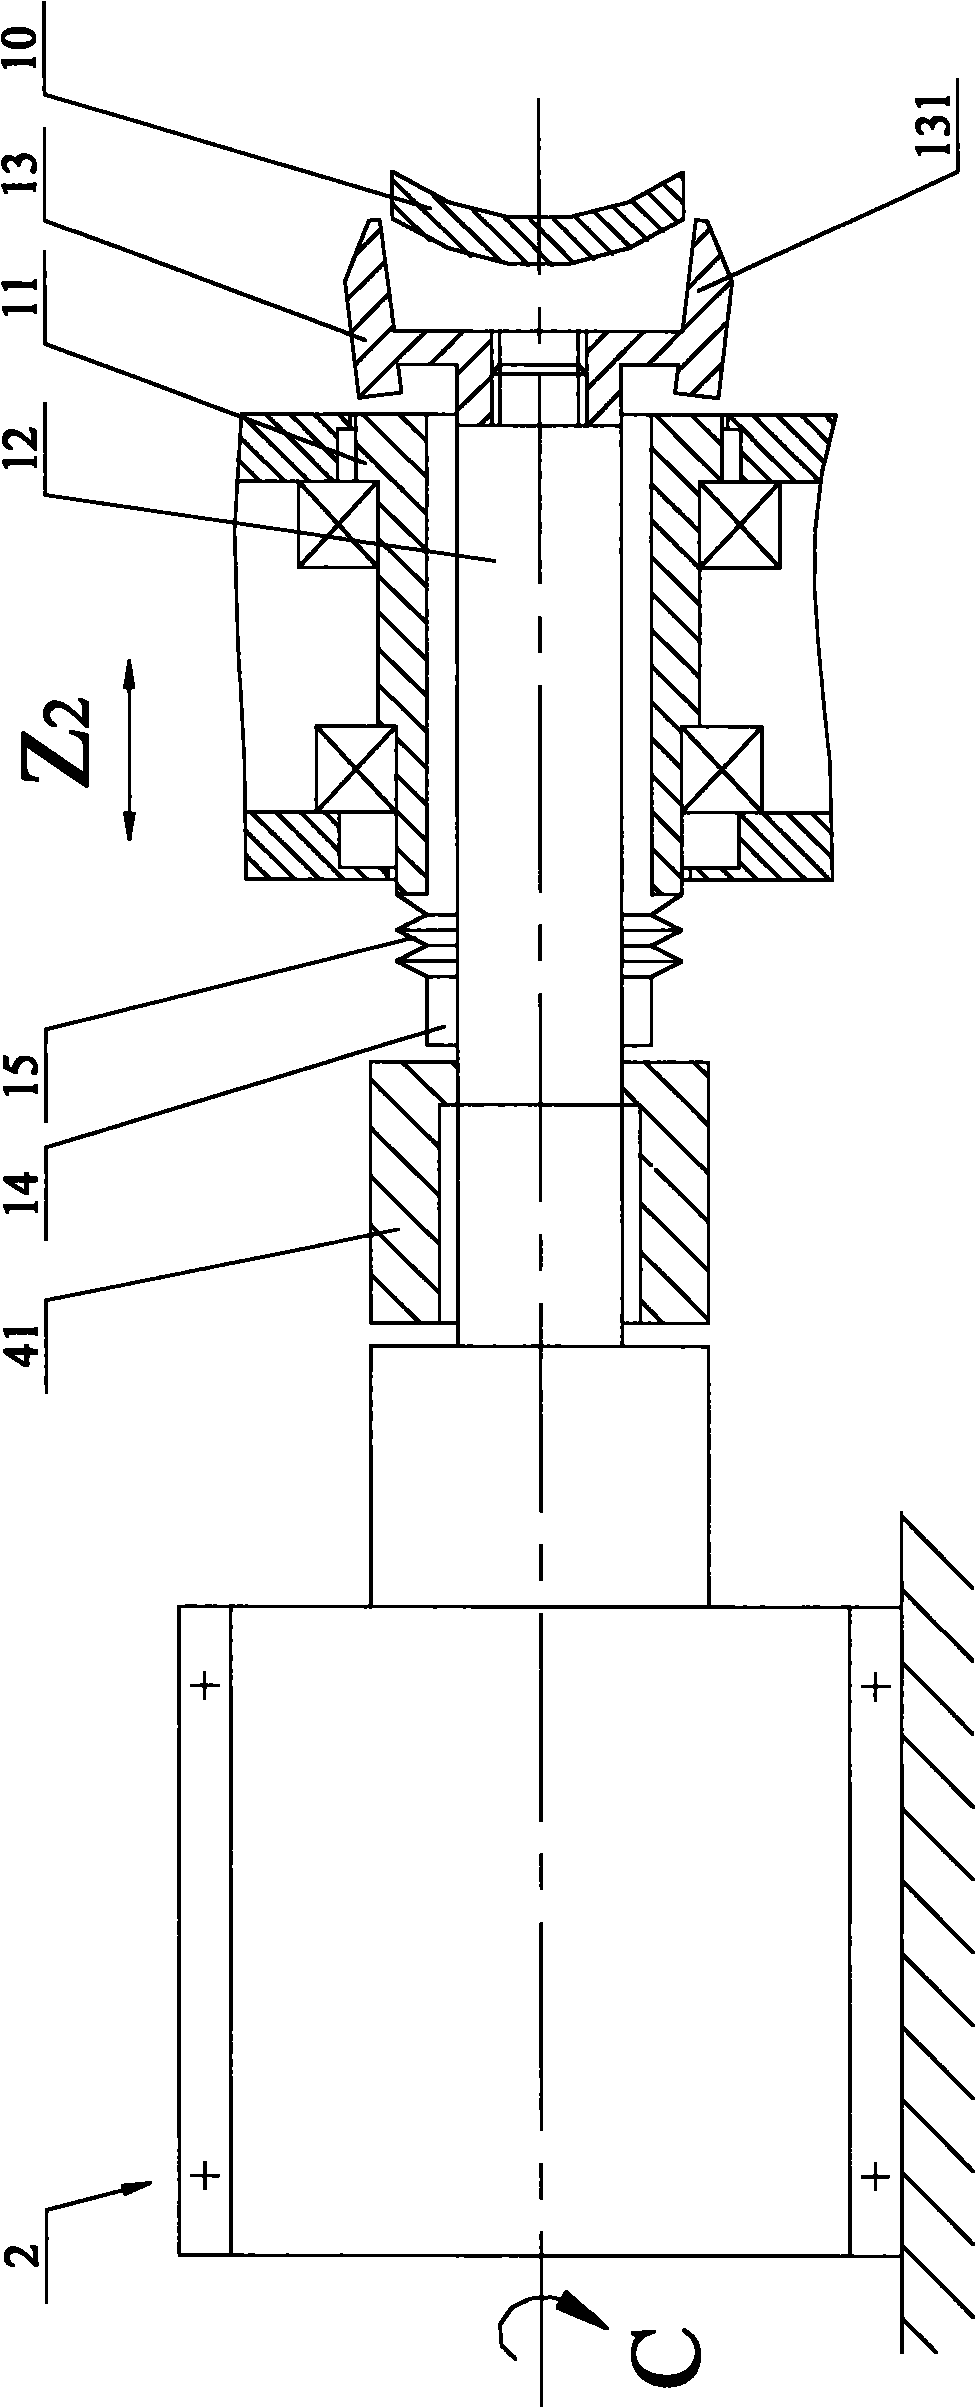 Free-form surface processing device